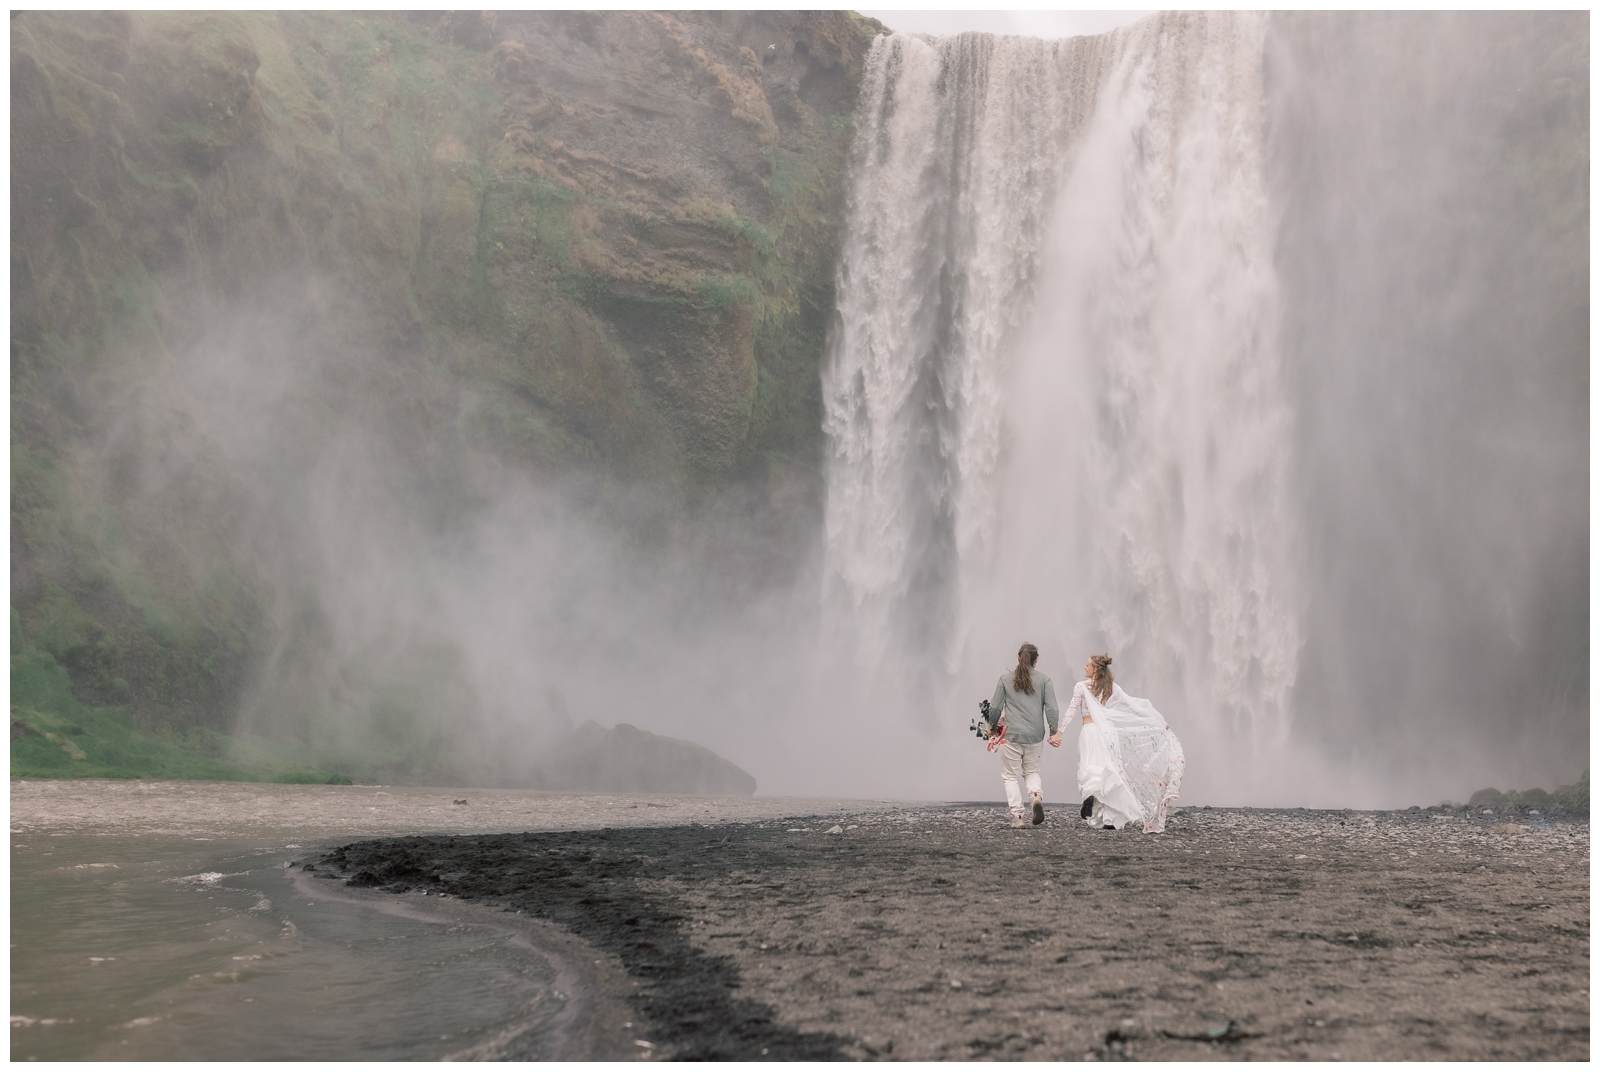 Skogafoss is a popular tourist location in Iceland but still makes a great place to stop for bride and groom portraits during your elopement.